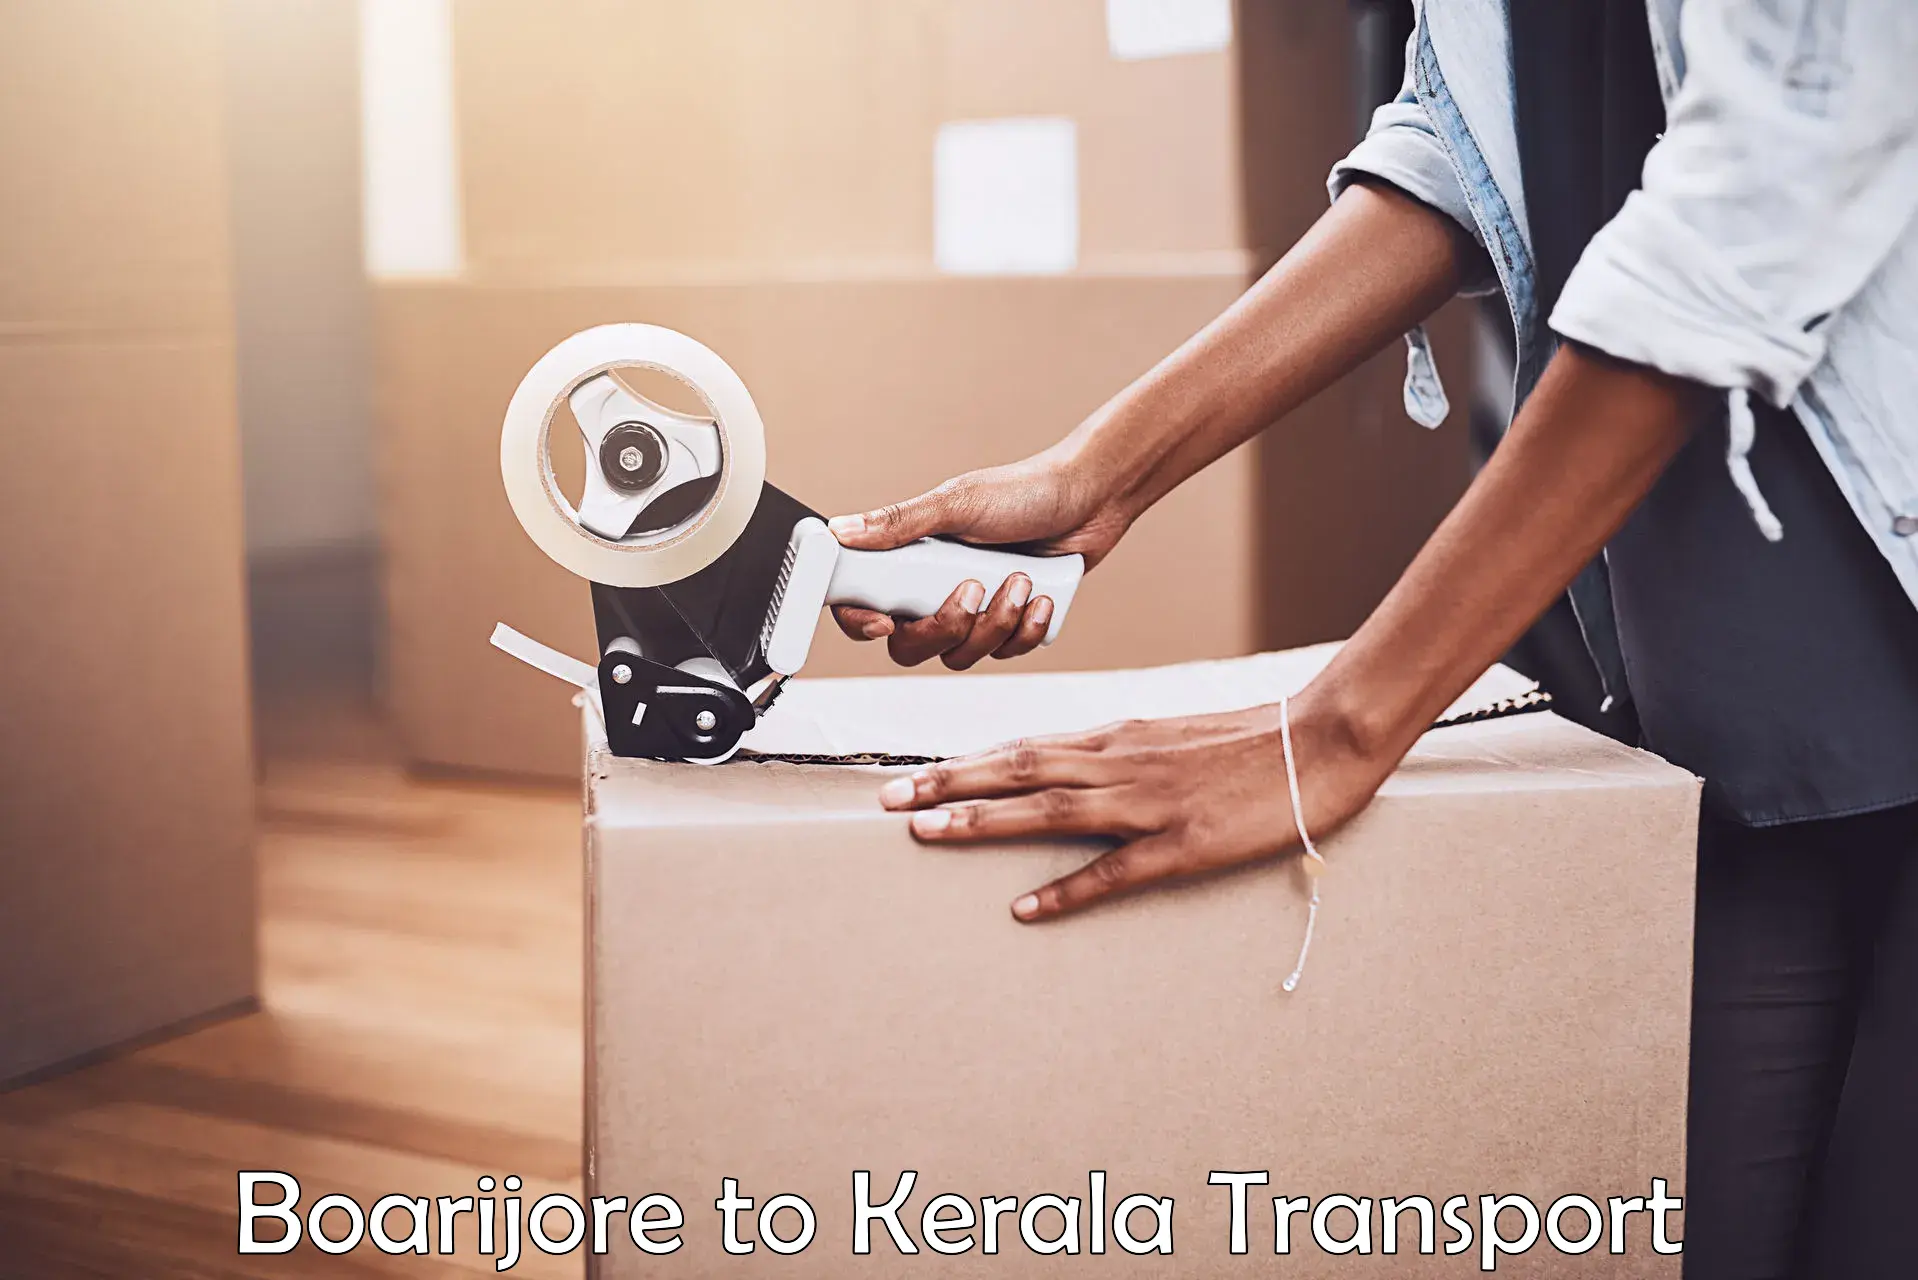 Truck transport companies in India Boarijore to Kozhikode